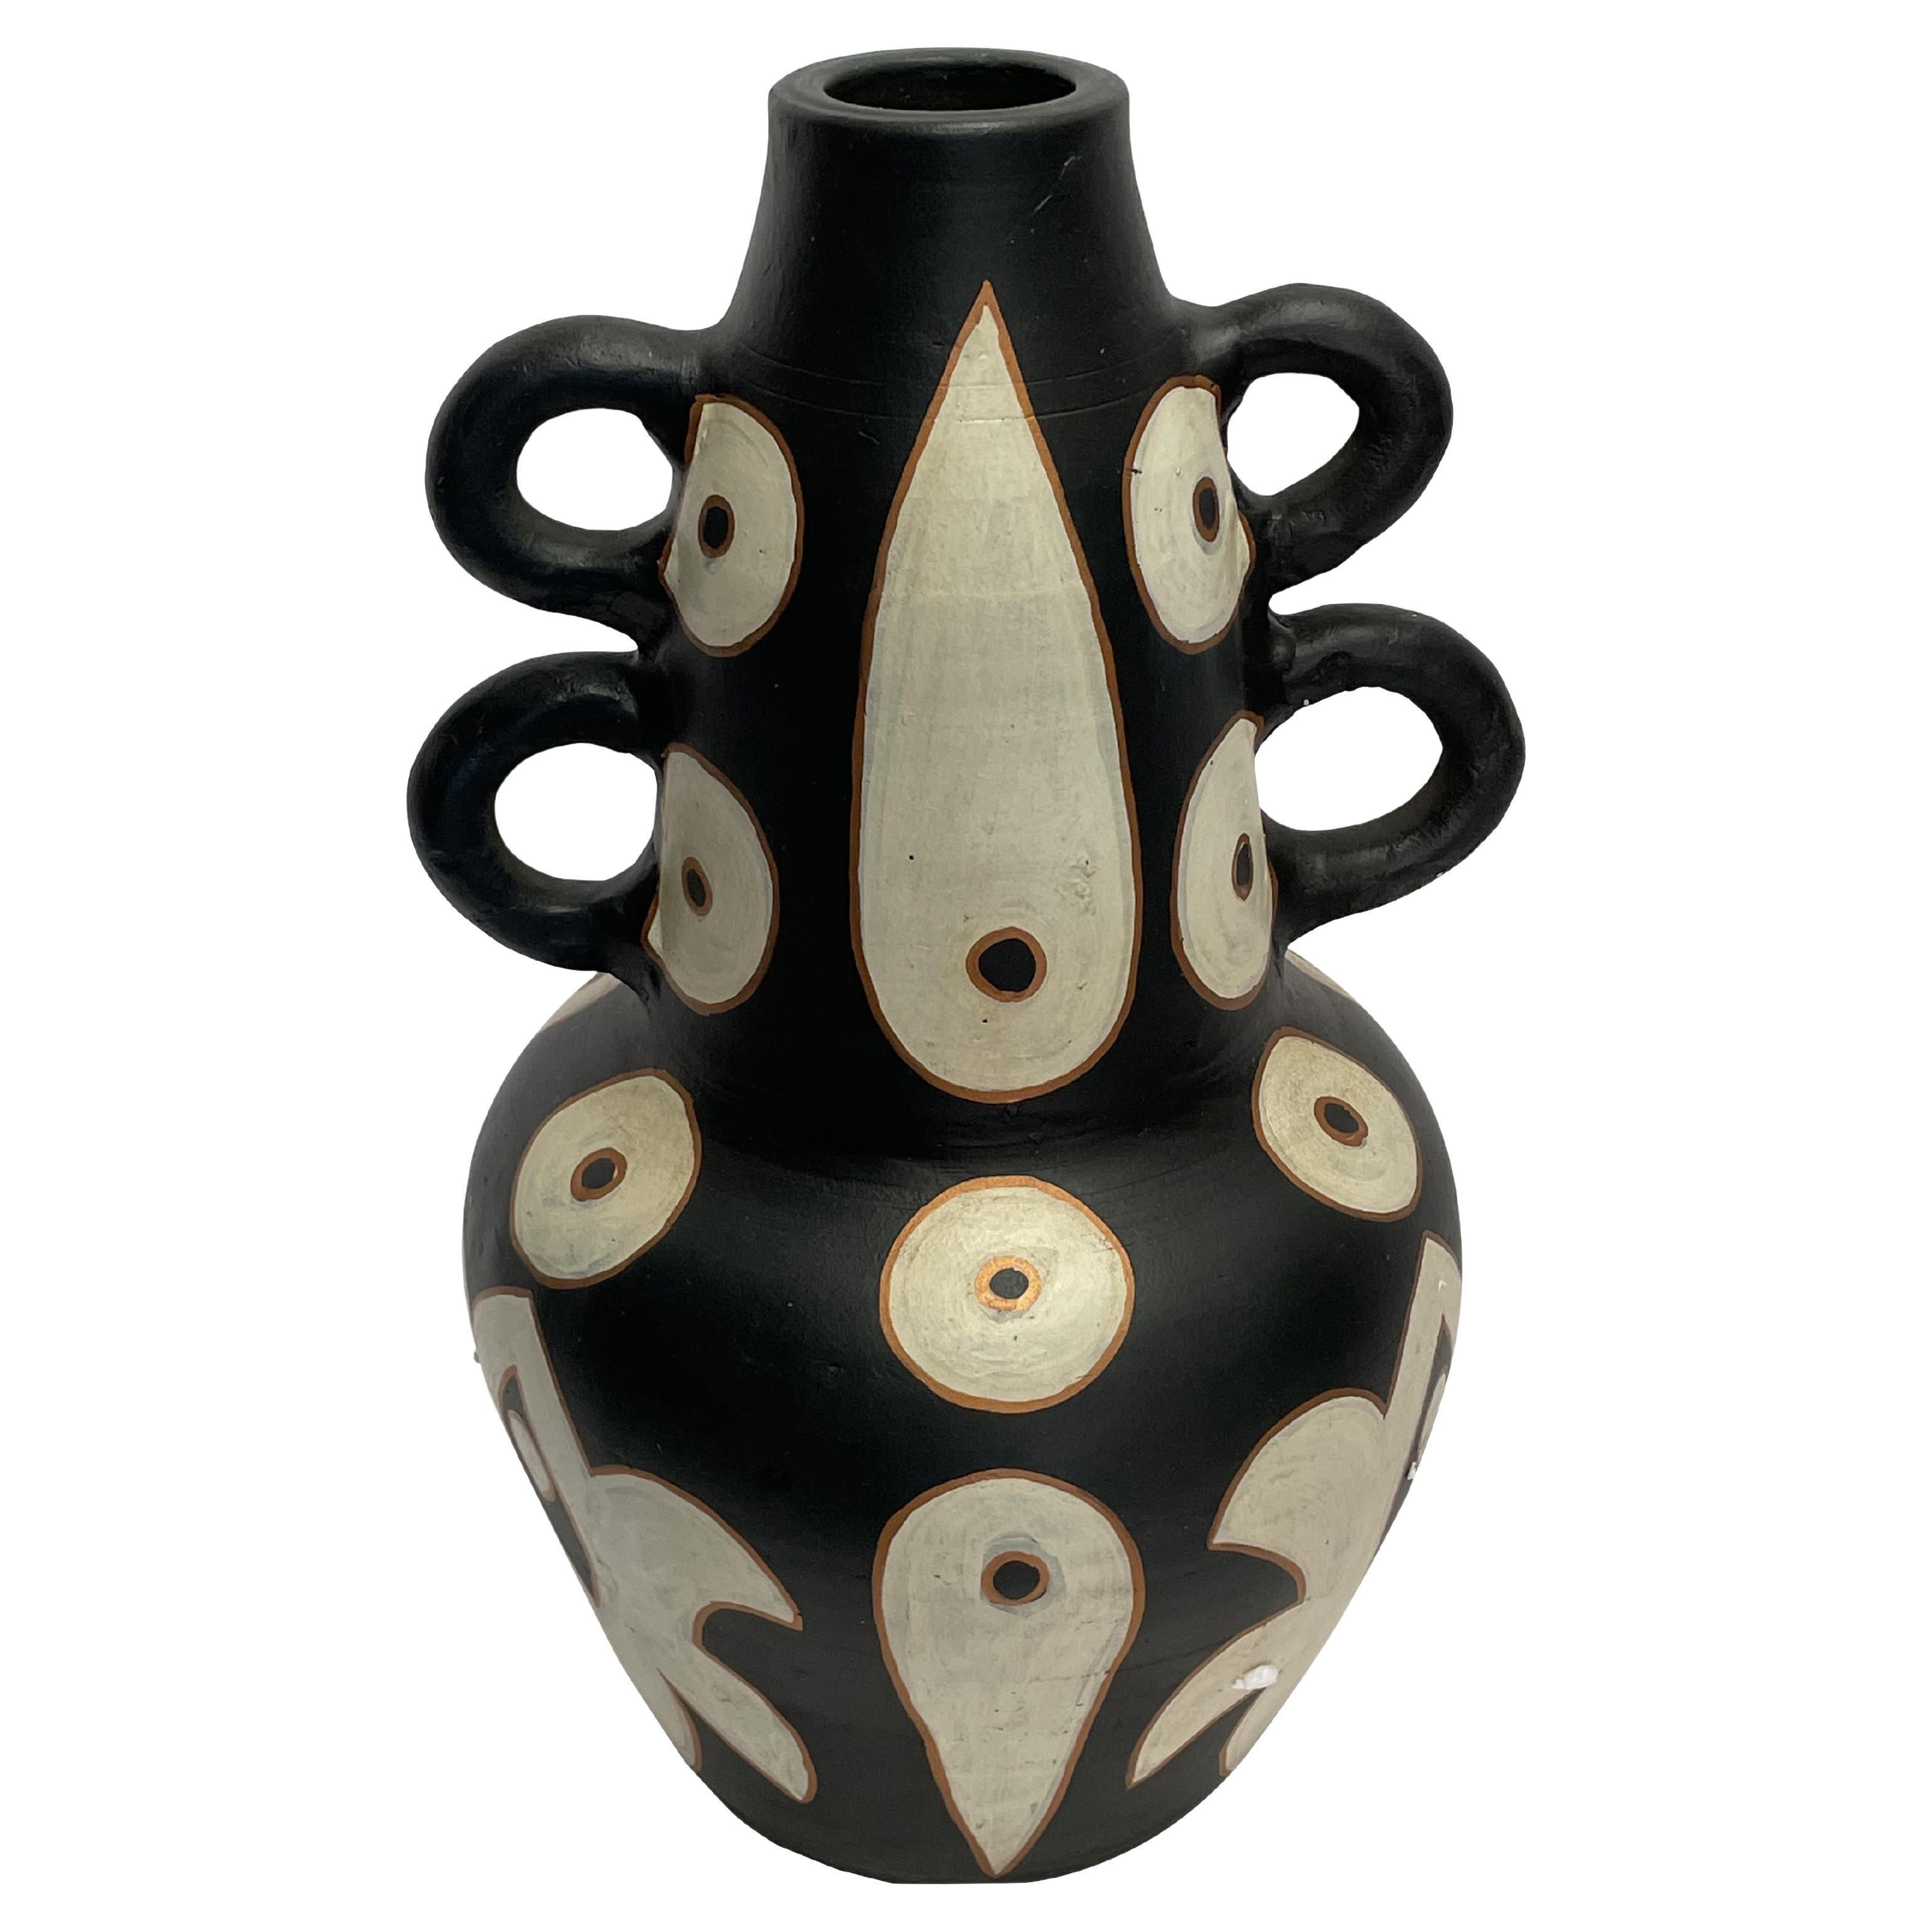 Black and White Tribal Pattern Four Handled Vase, China, Contemporary